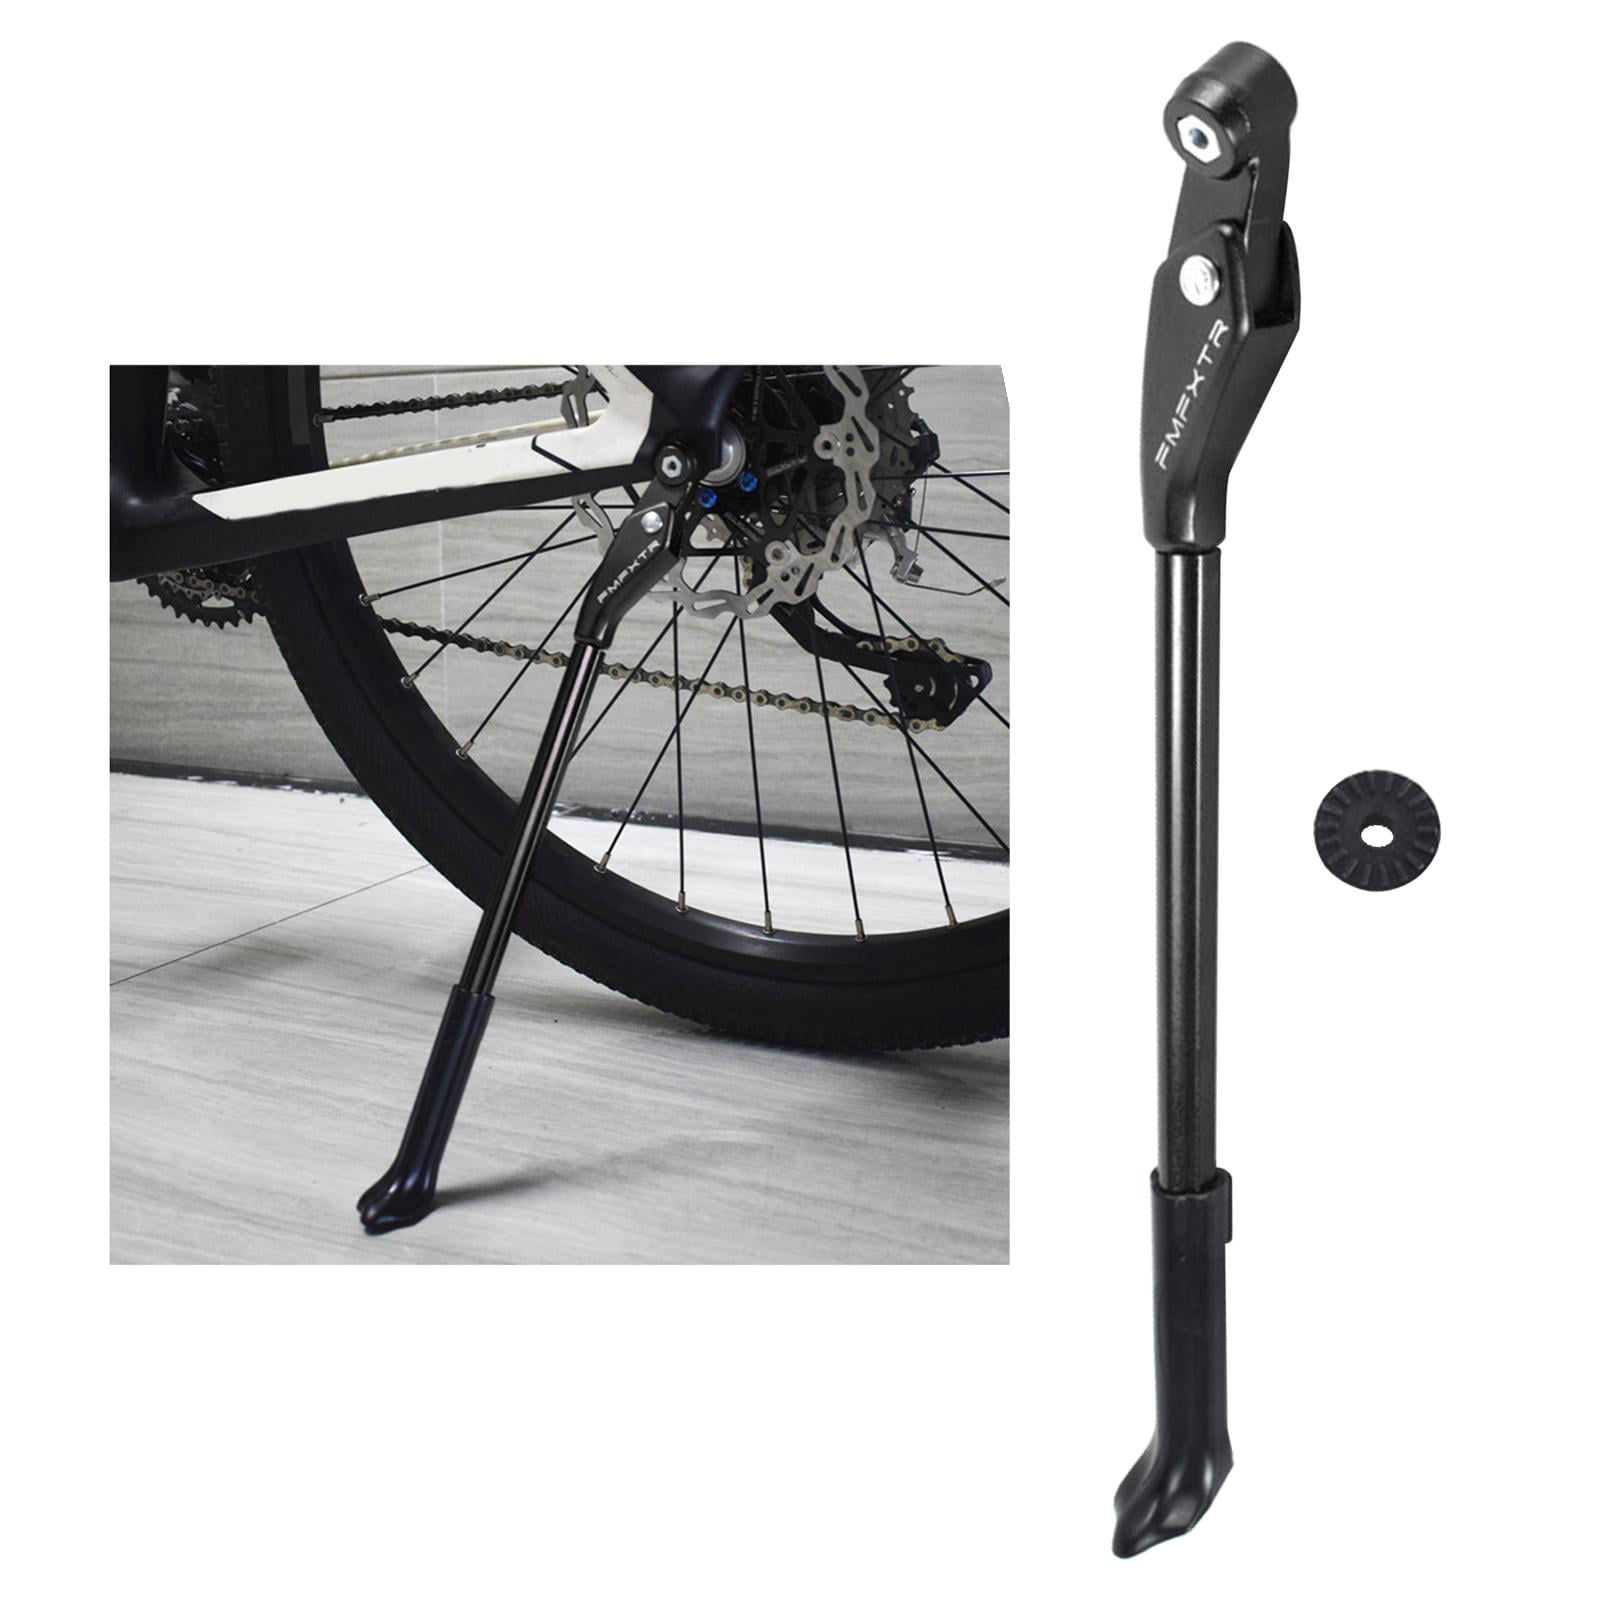 Fit for Childrens or Adults 16 18 20 22 inch Mountain Bike/Road Bicycles Bike Kick Stand Black Adjustable Aluminum Alloy Kick Stand 